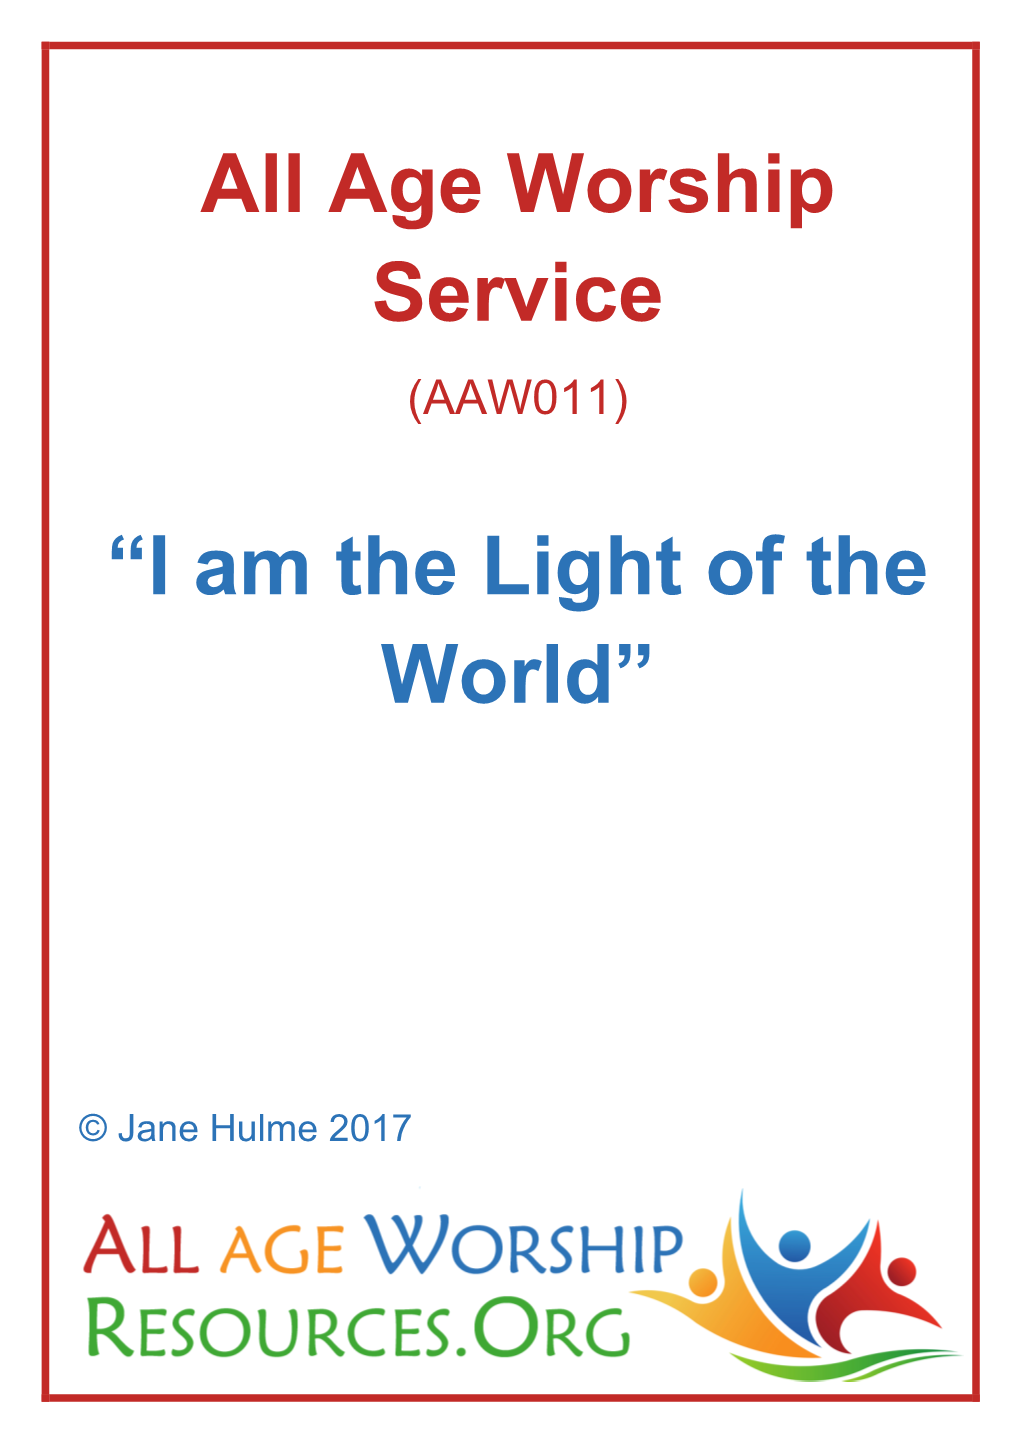 I Am the Light of the World”